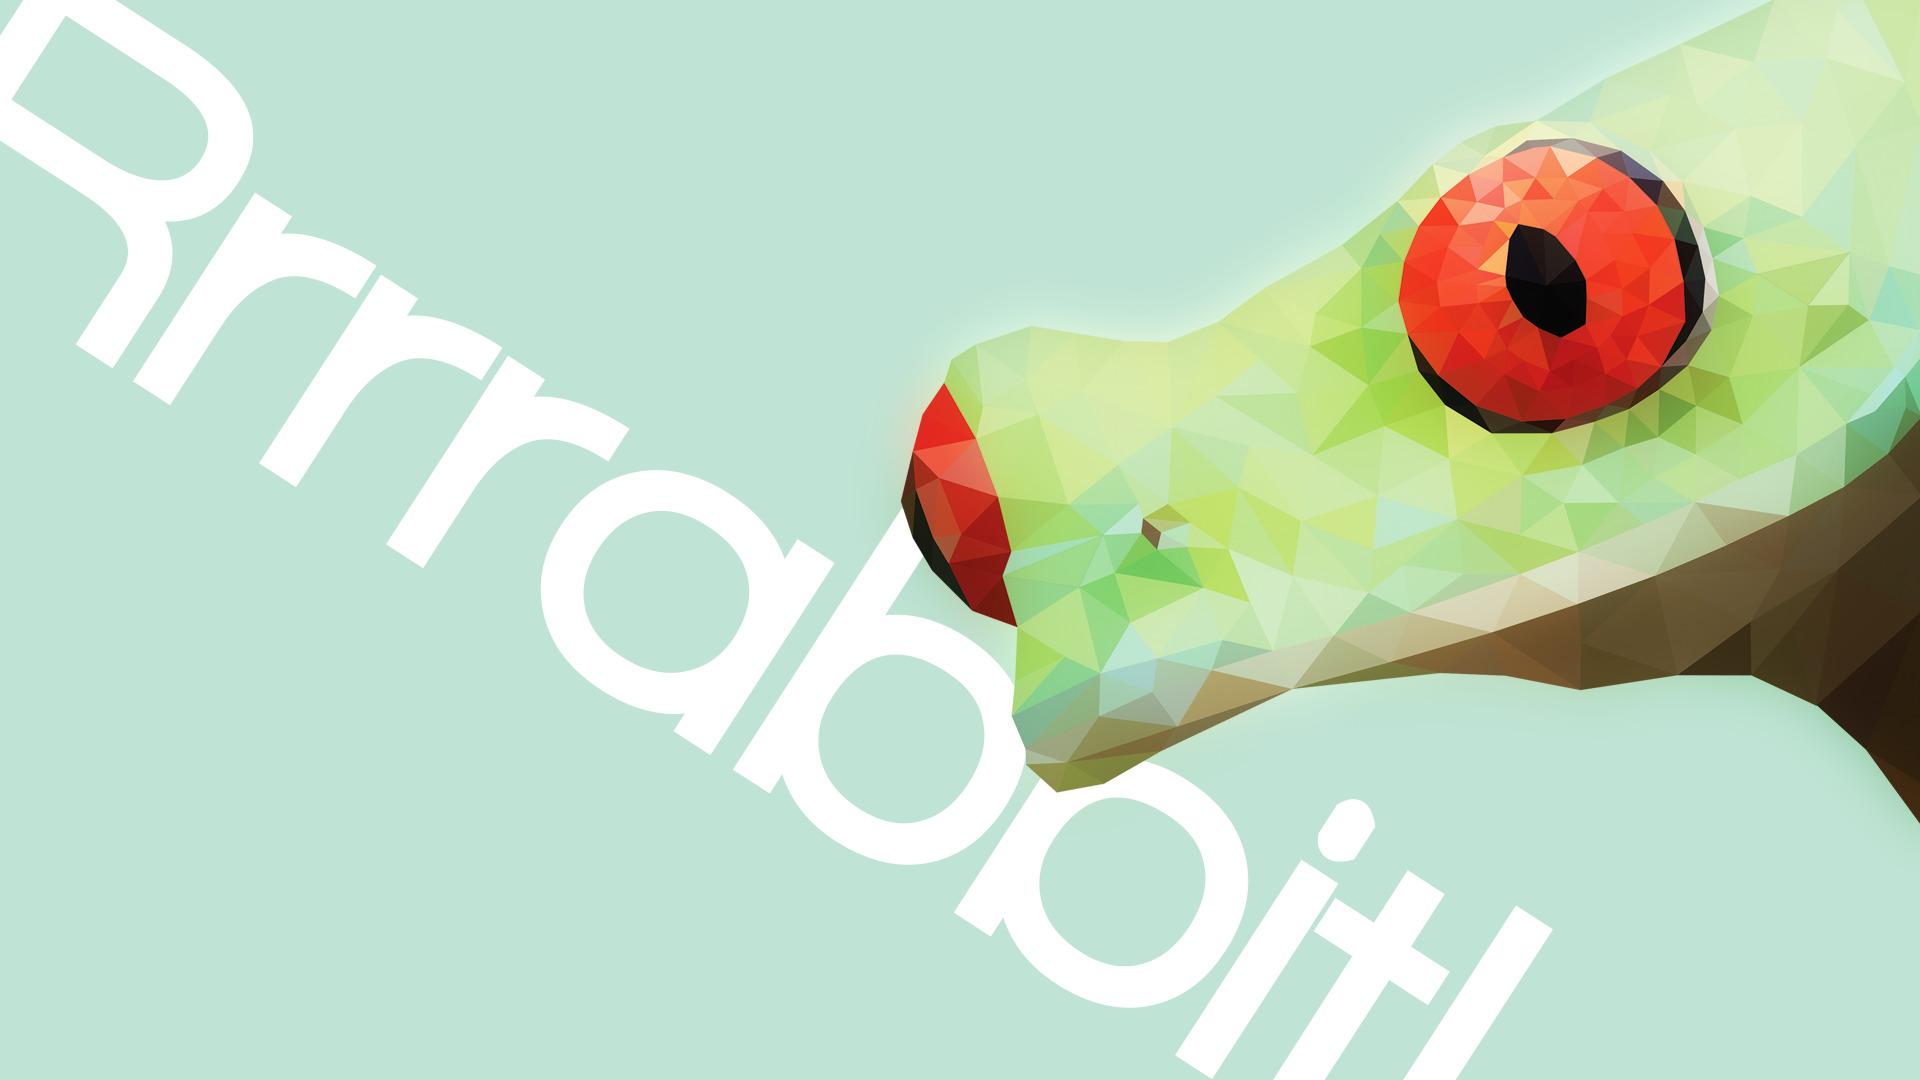 animals, Simple, Frog, Low Poly, Simple Background, Digital Art, Artwork, Red Eyed Tree Frogs Wallpaper